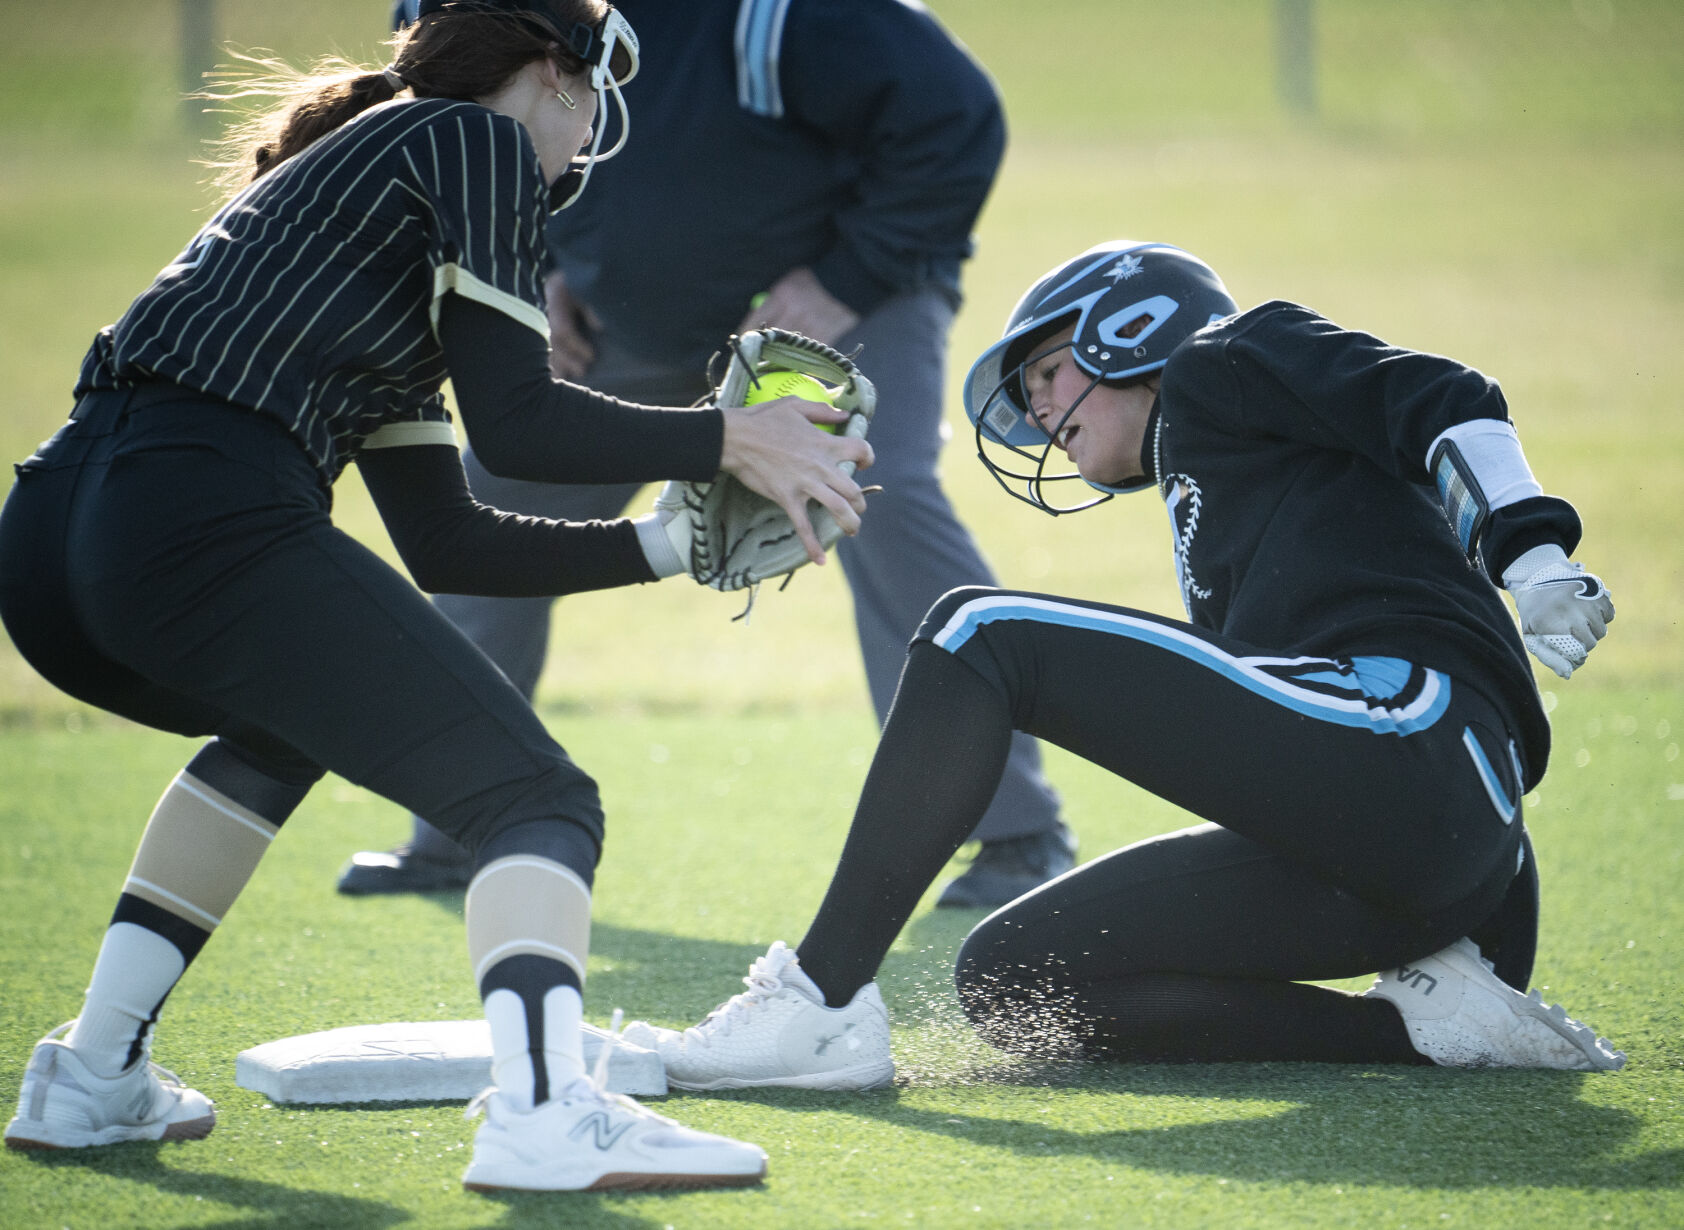 Cheyenne East Softball Overcomes Four-Game Skid with Crushing 29-0 Win over Cheyenne South